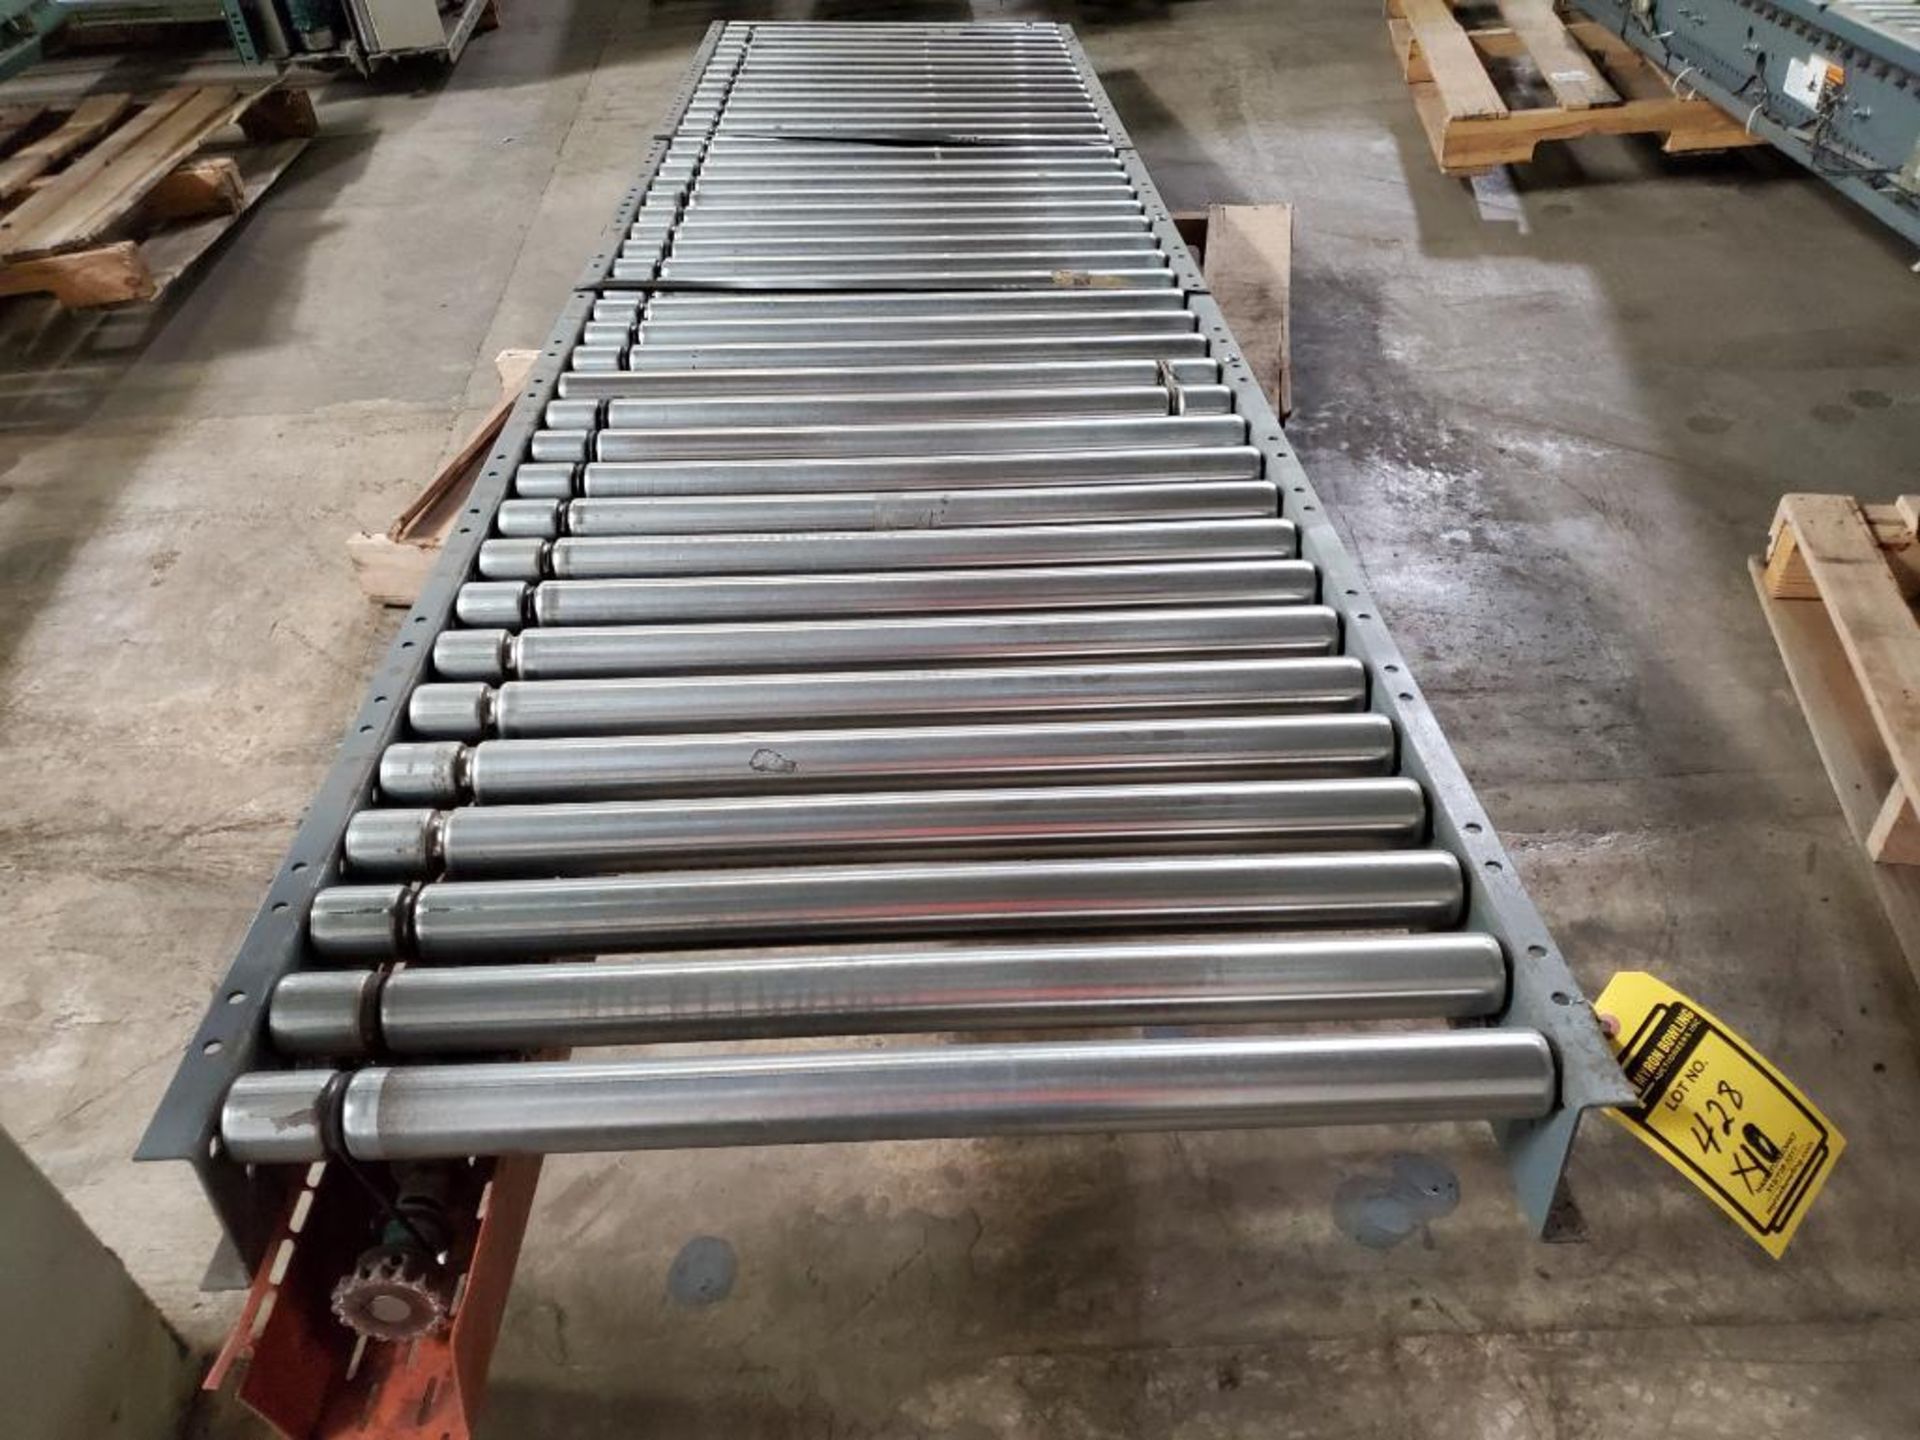 (10x) TGW Motor Roller Conveyor, Assorted Size Rollers ($50 Loading fee will be added to buyers invo